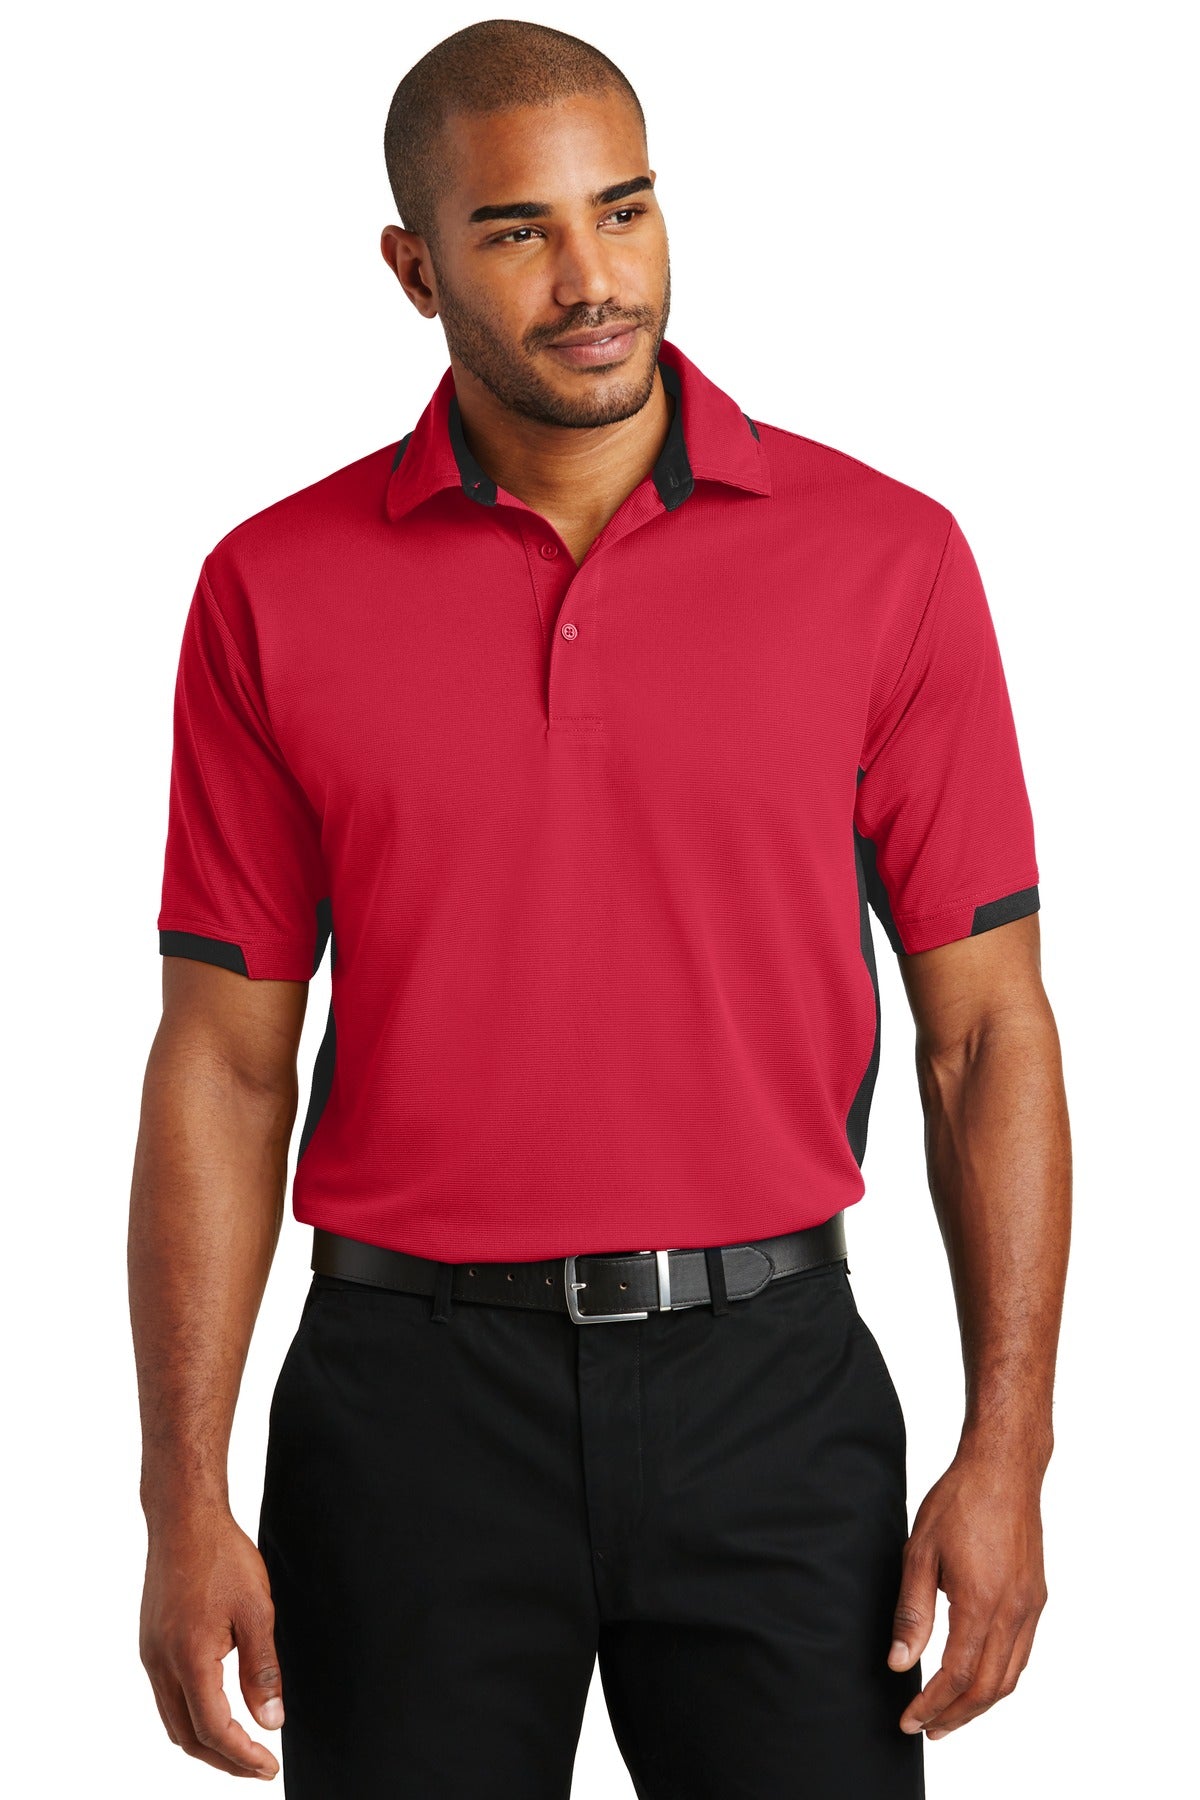 Polos/Knits Engine Red/ Black Port Authority